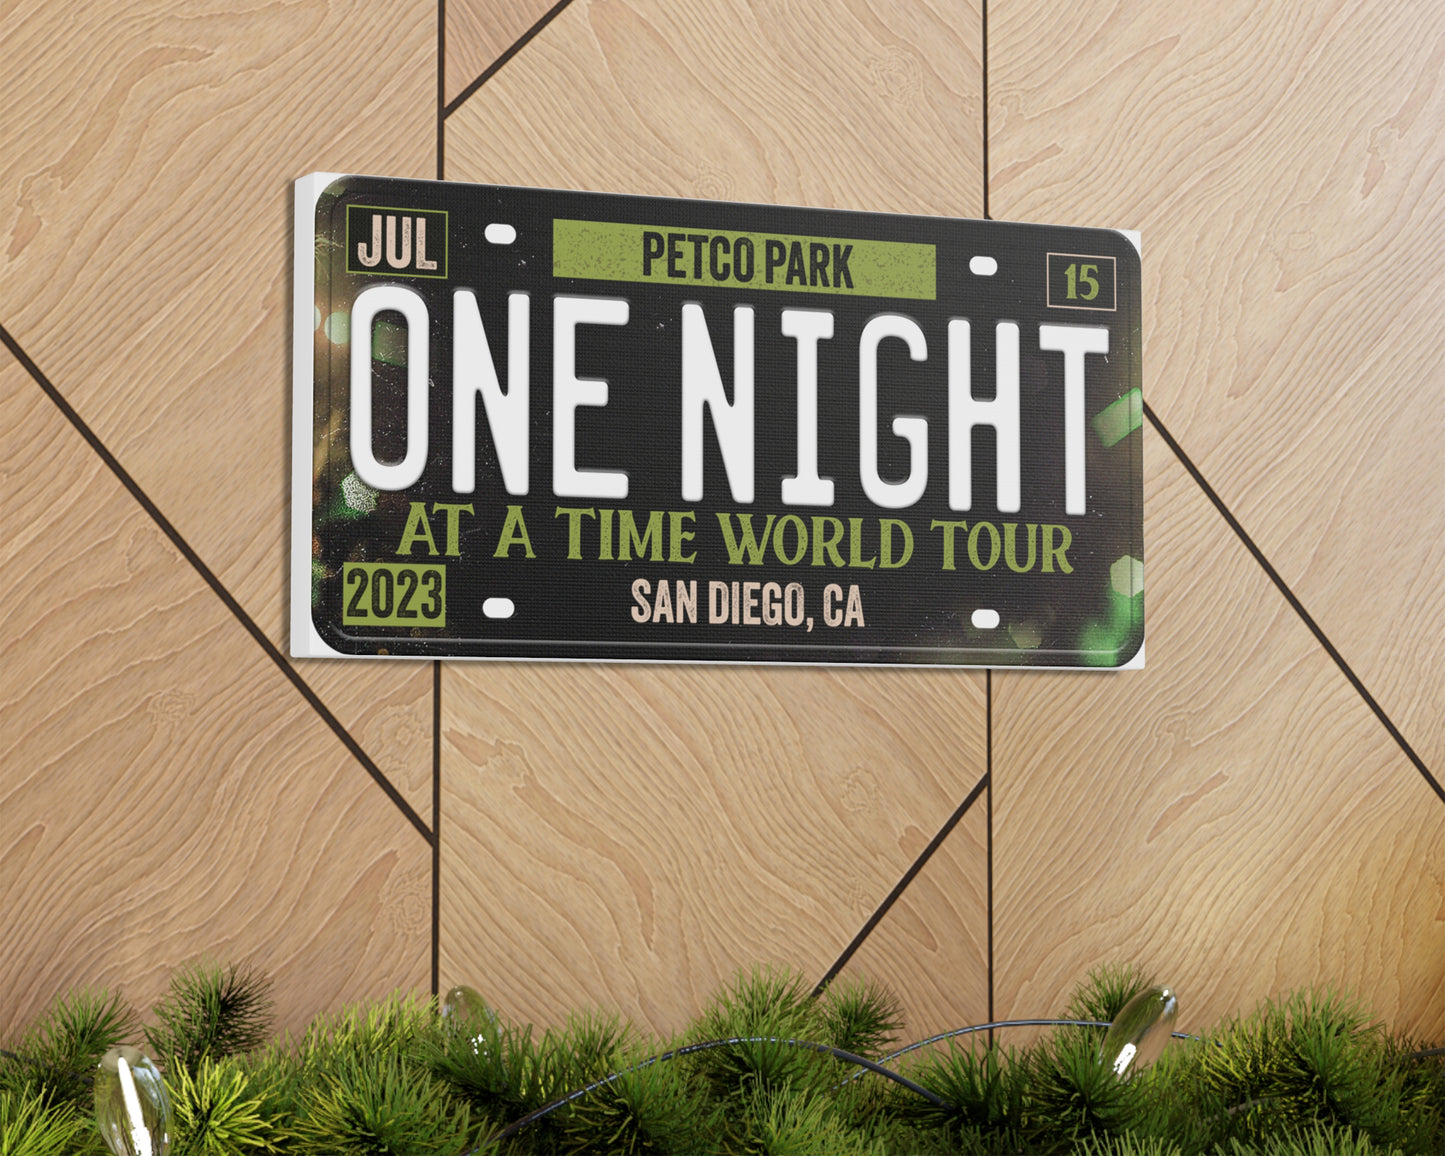 One Night at a Time World Tour canvas wall decor